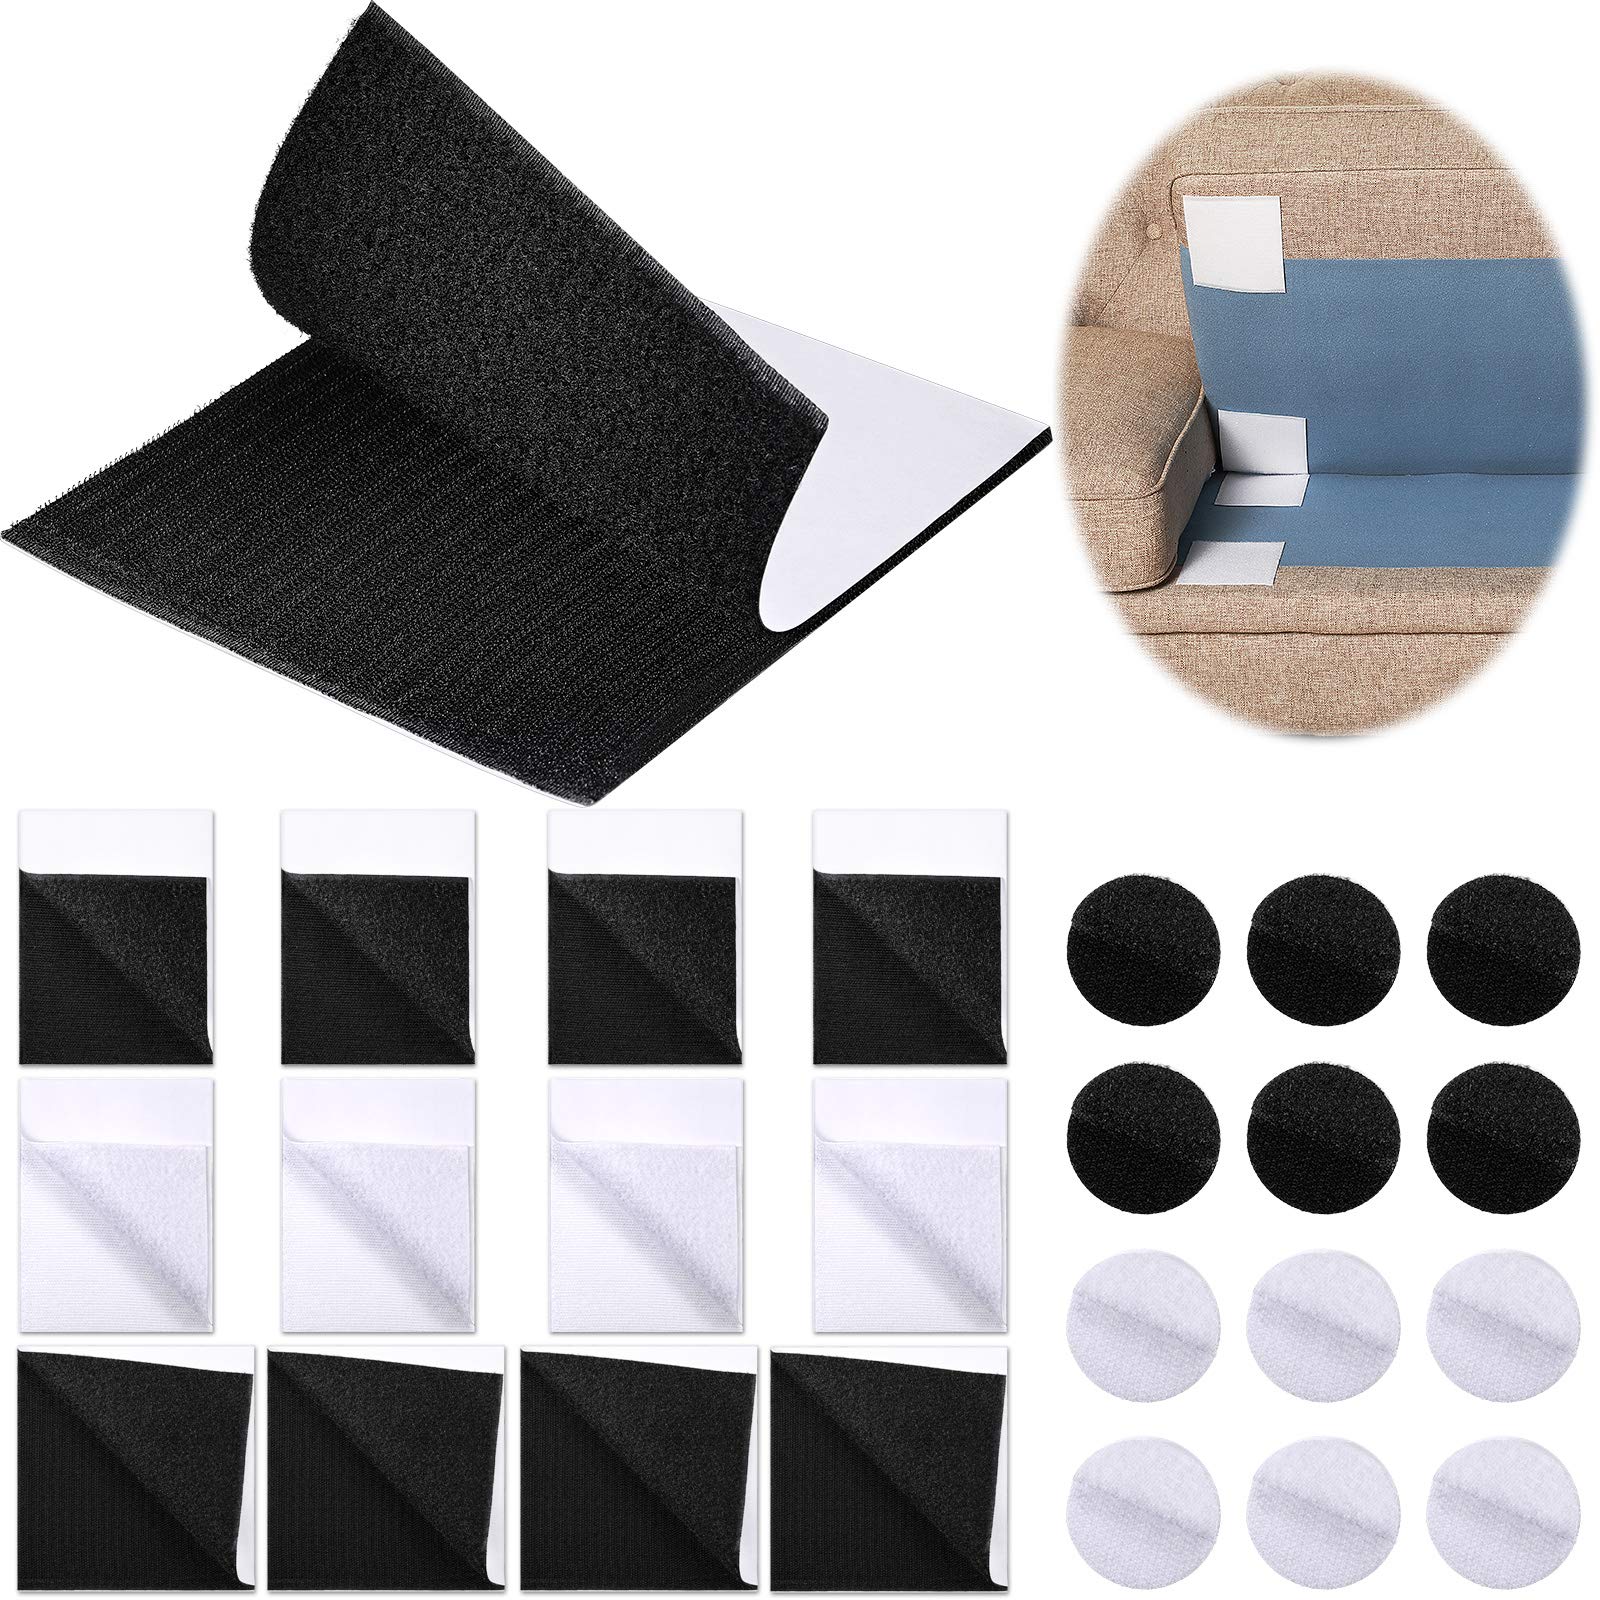 24 Pieces Self Adhesive Non-Slip Cushion Pad for Couch, Keeping Sofa Cushions from Sliding, Hook Loop Tape Gripper Keep for Sheet, Carpet, Seating Cushions, 6 x 6 inch, 4 x 6 inch, 1.6 x 1.6 inch